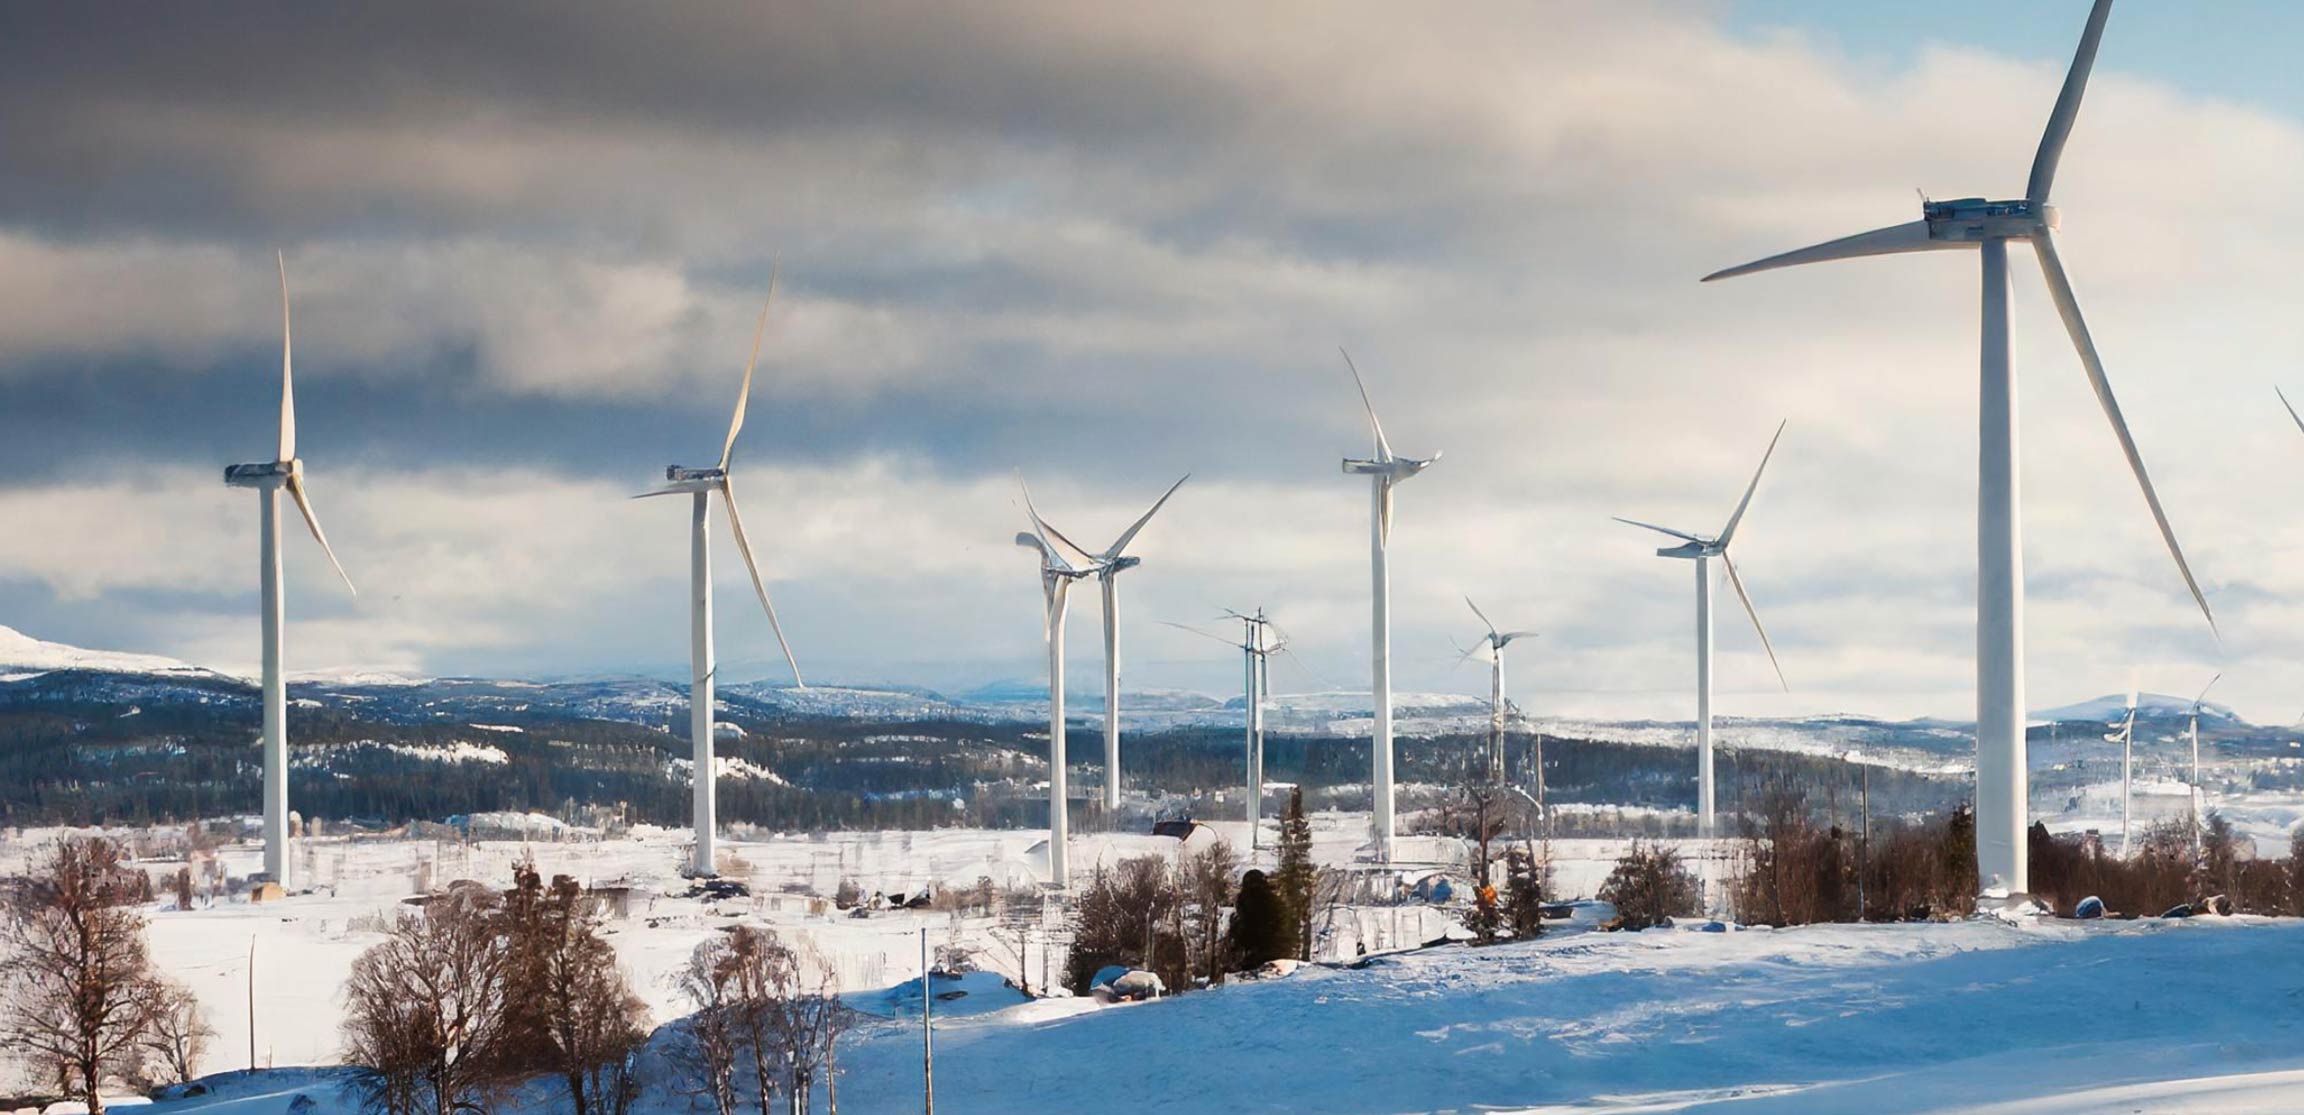 The Swedish electricity market is distinguished by its robust infrastructure and diverse mix of energy sources